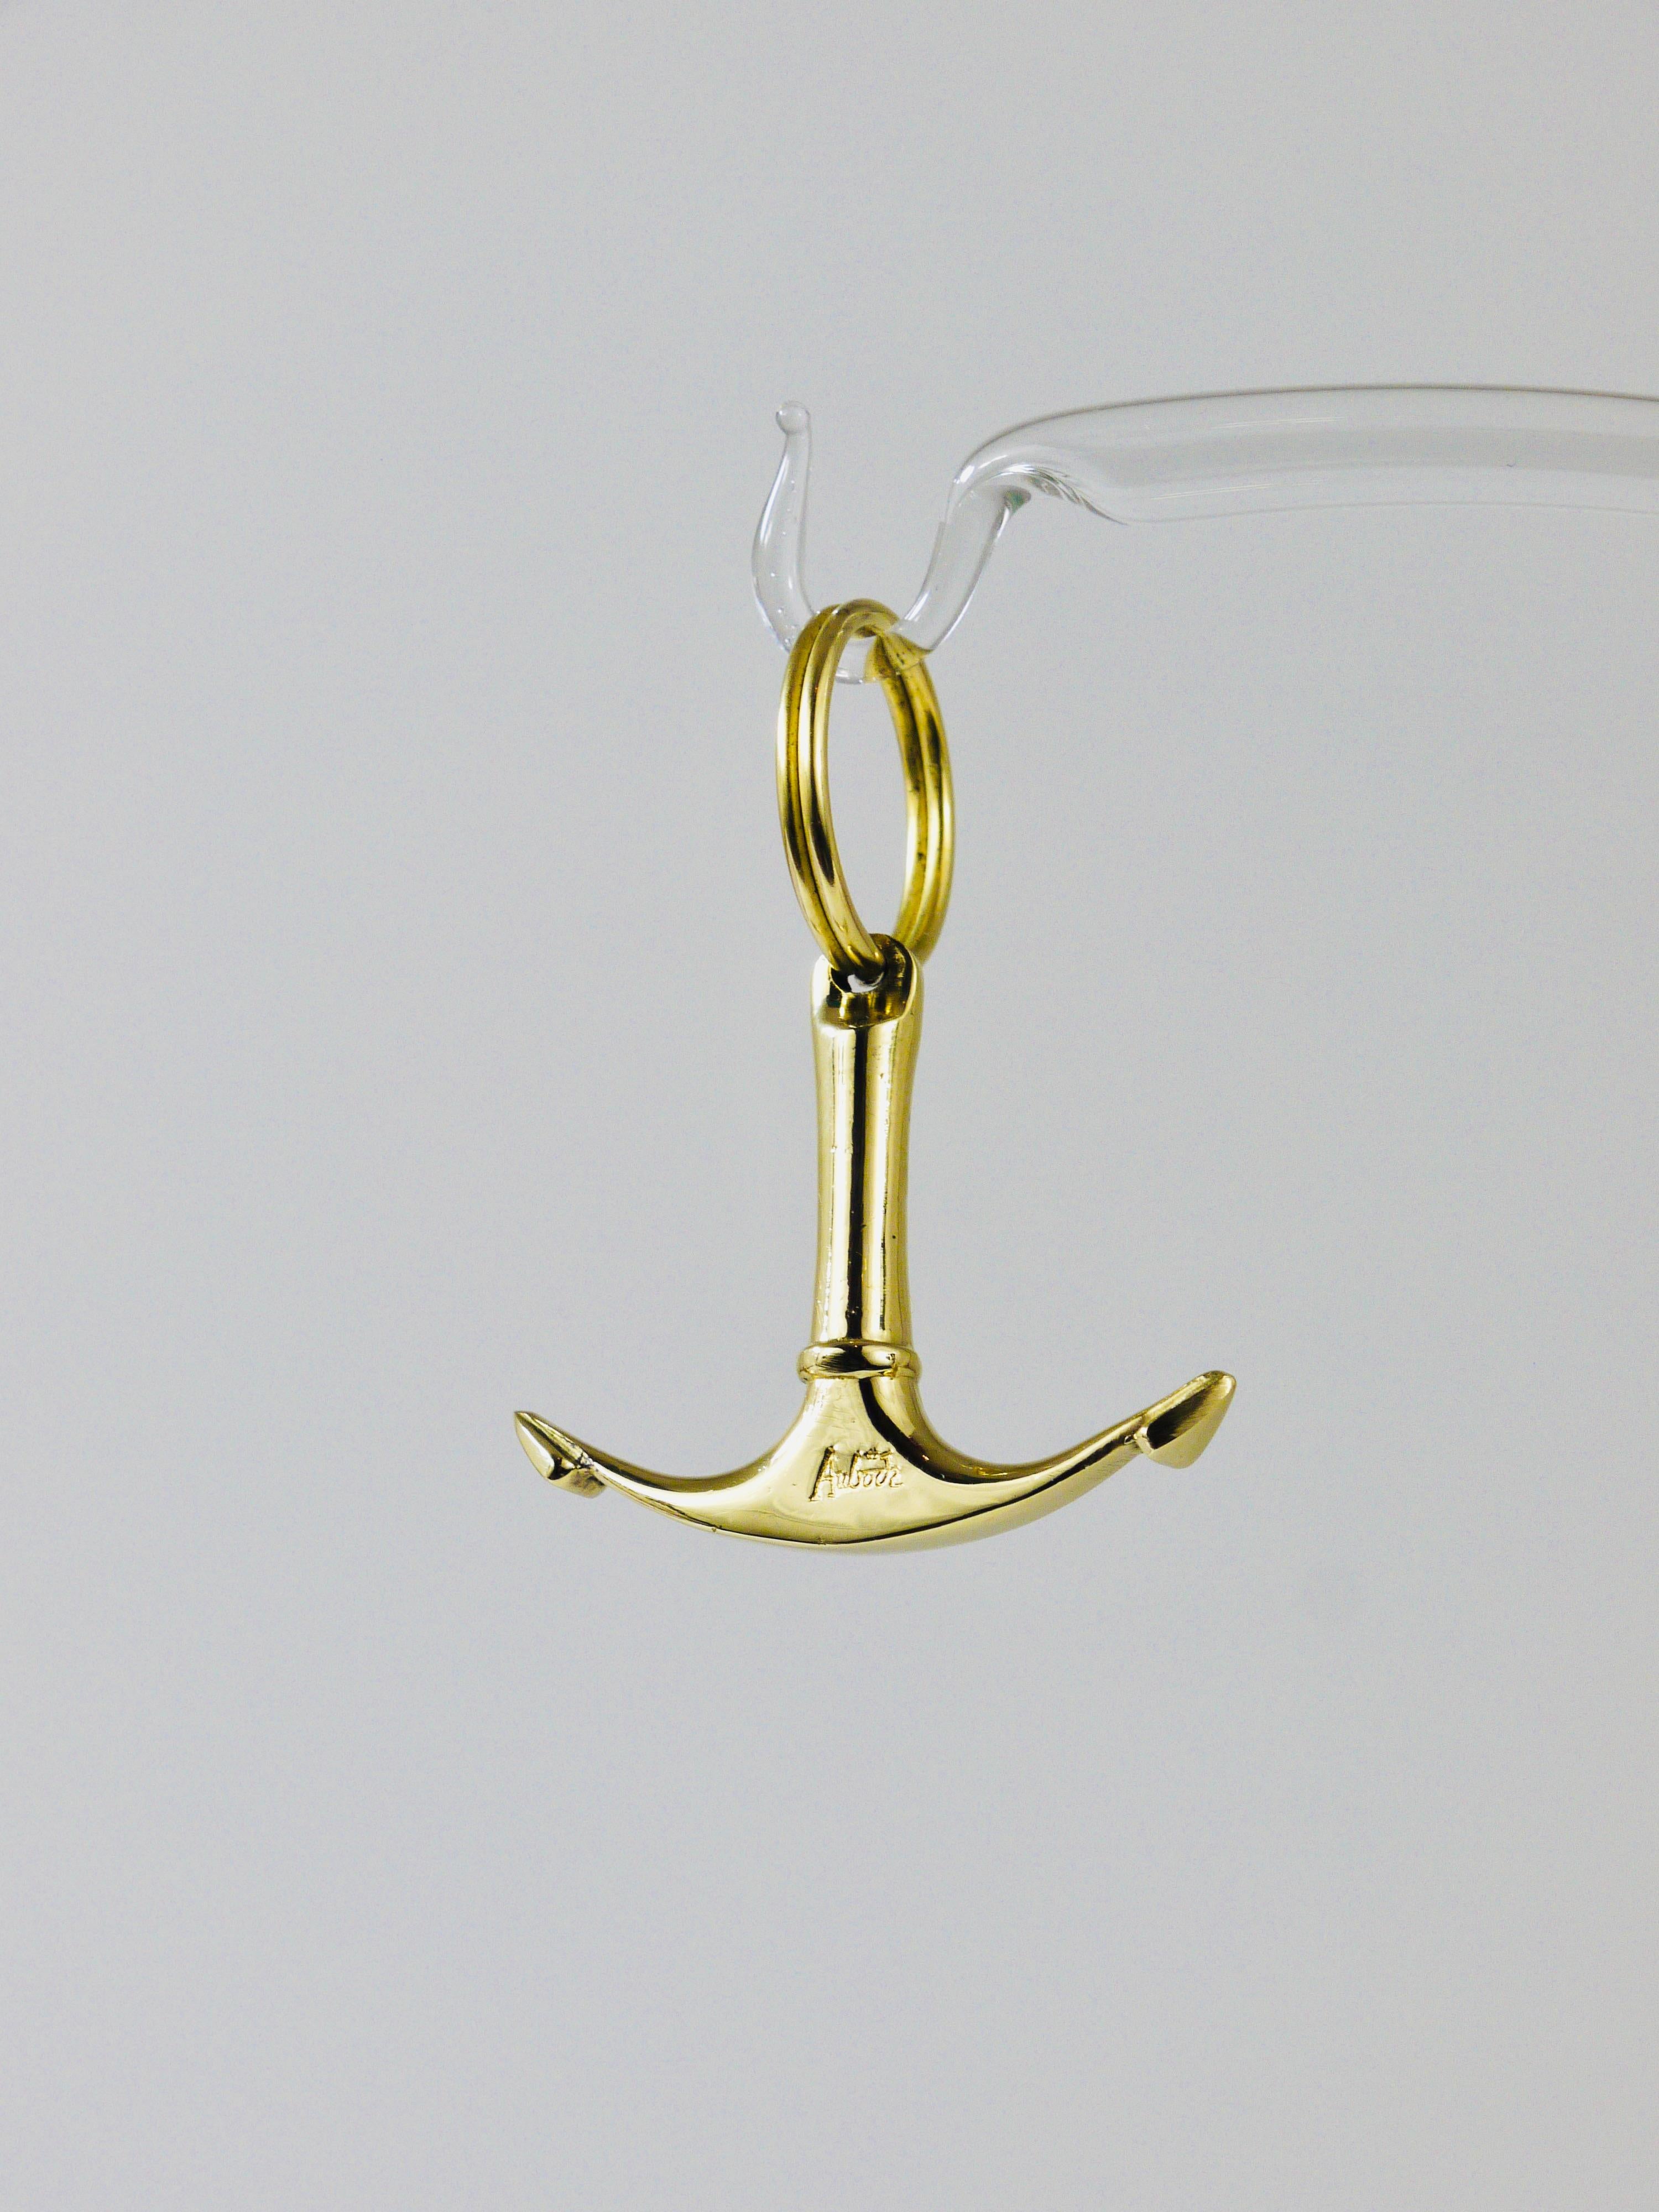 Carl Auböck Handcrafted Midcentury Brass Anchor Figurine Key Ring Chain Holder In Excellent Condition For Sale In Vienna, AT